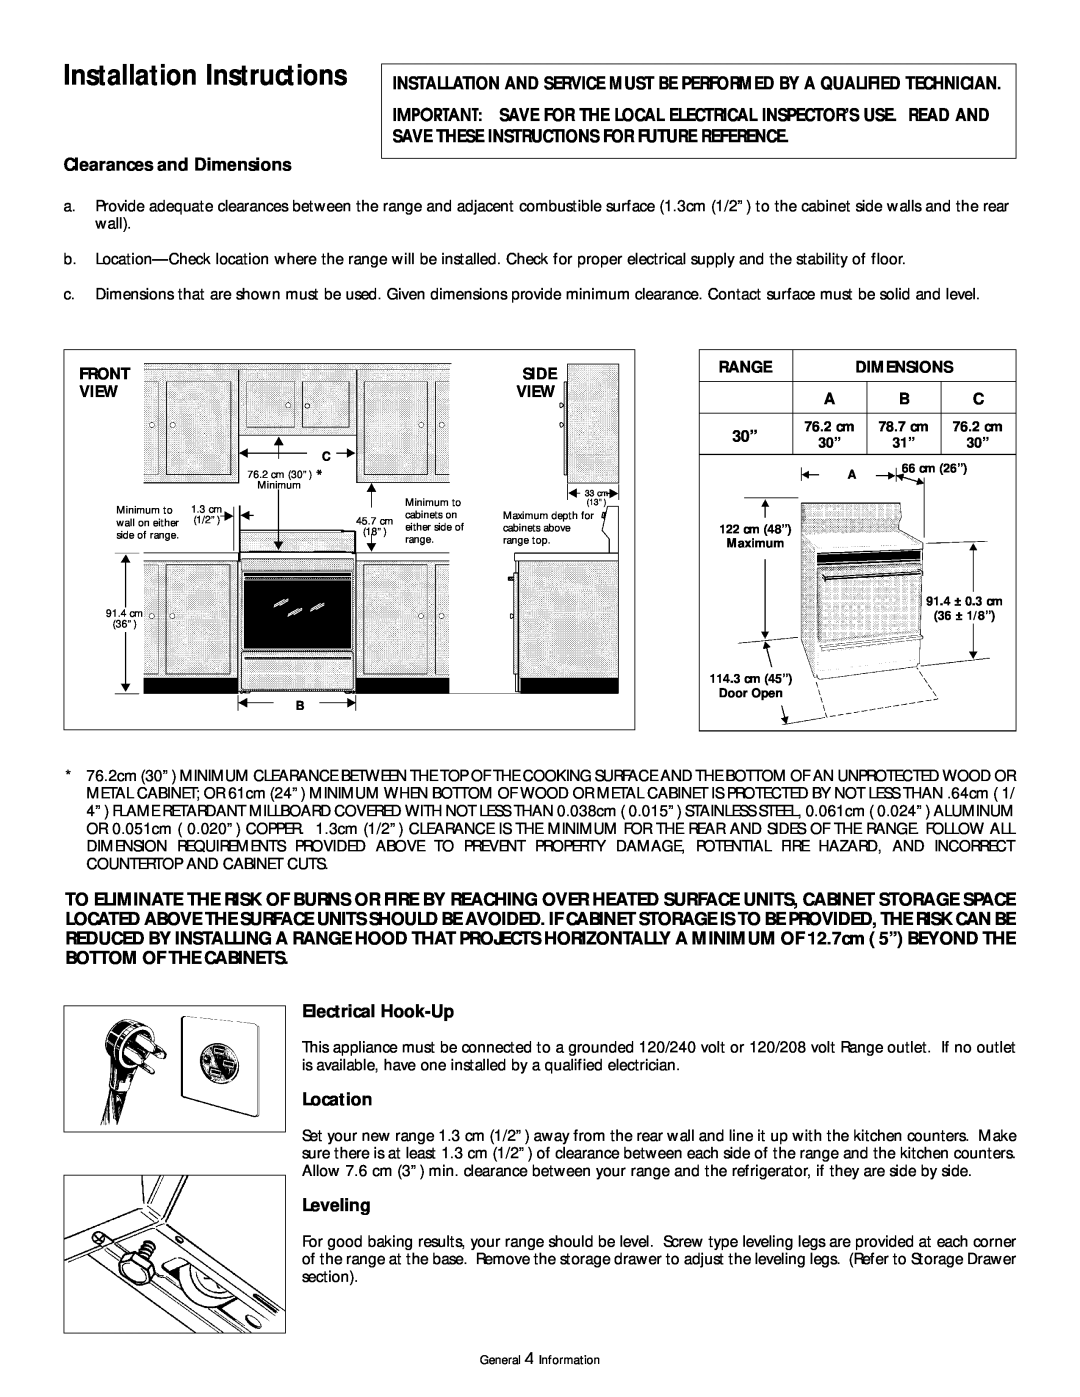 Frigidaire 318200404 Installation Instructions, Clearances and Dimensions, Save These Instructions For Future Reference 